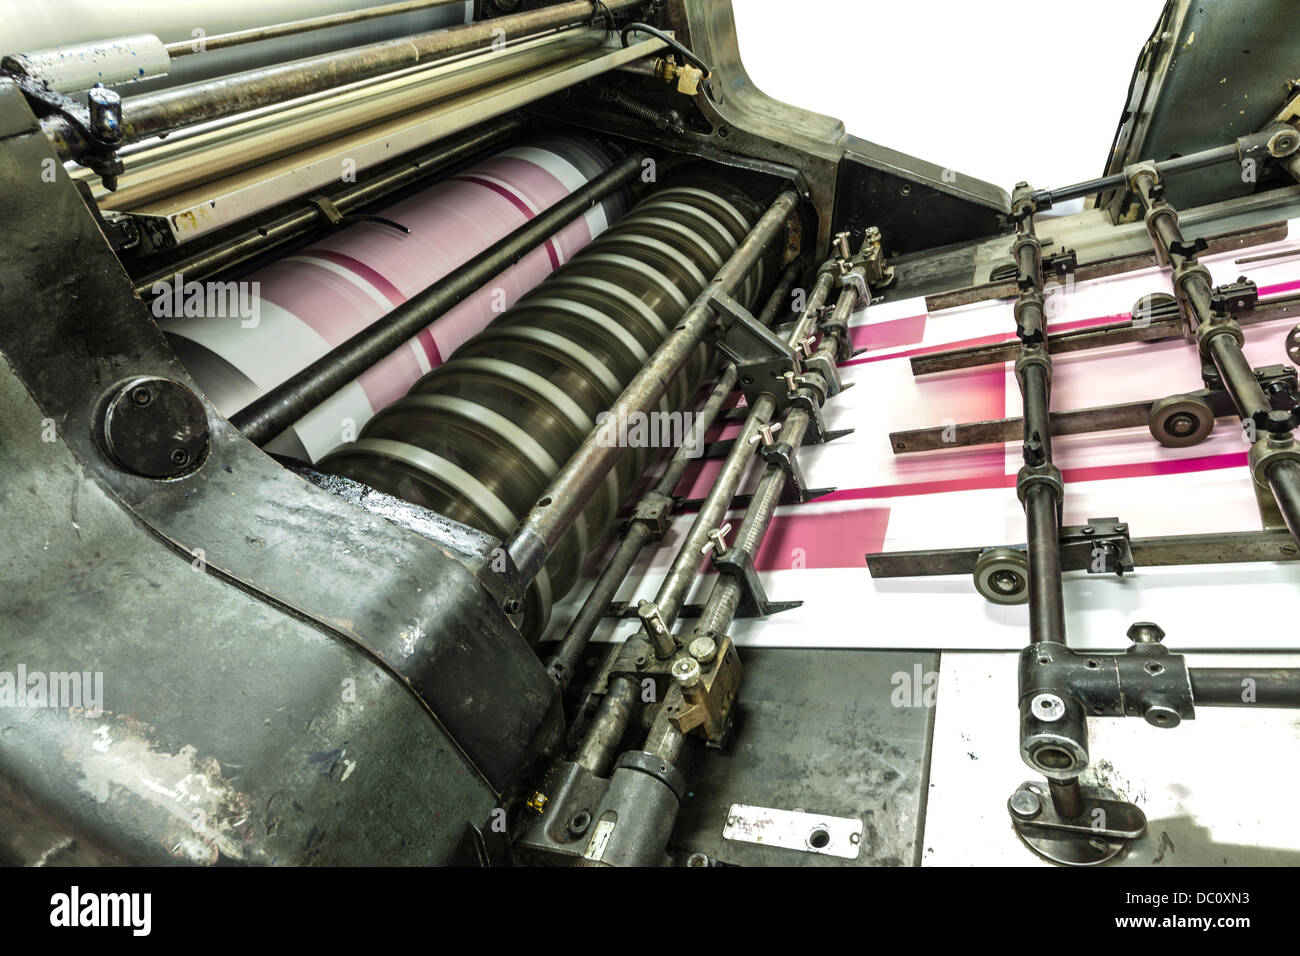 View of a part of a machine in a paper industry. It shows part of machine in work process. Stock Photo